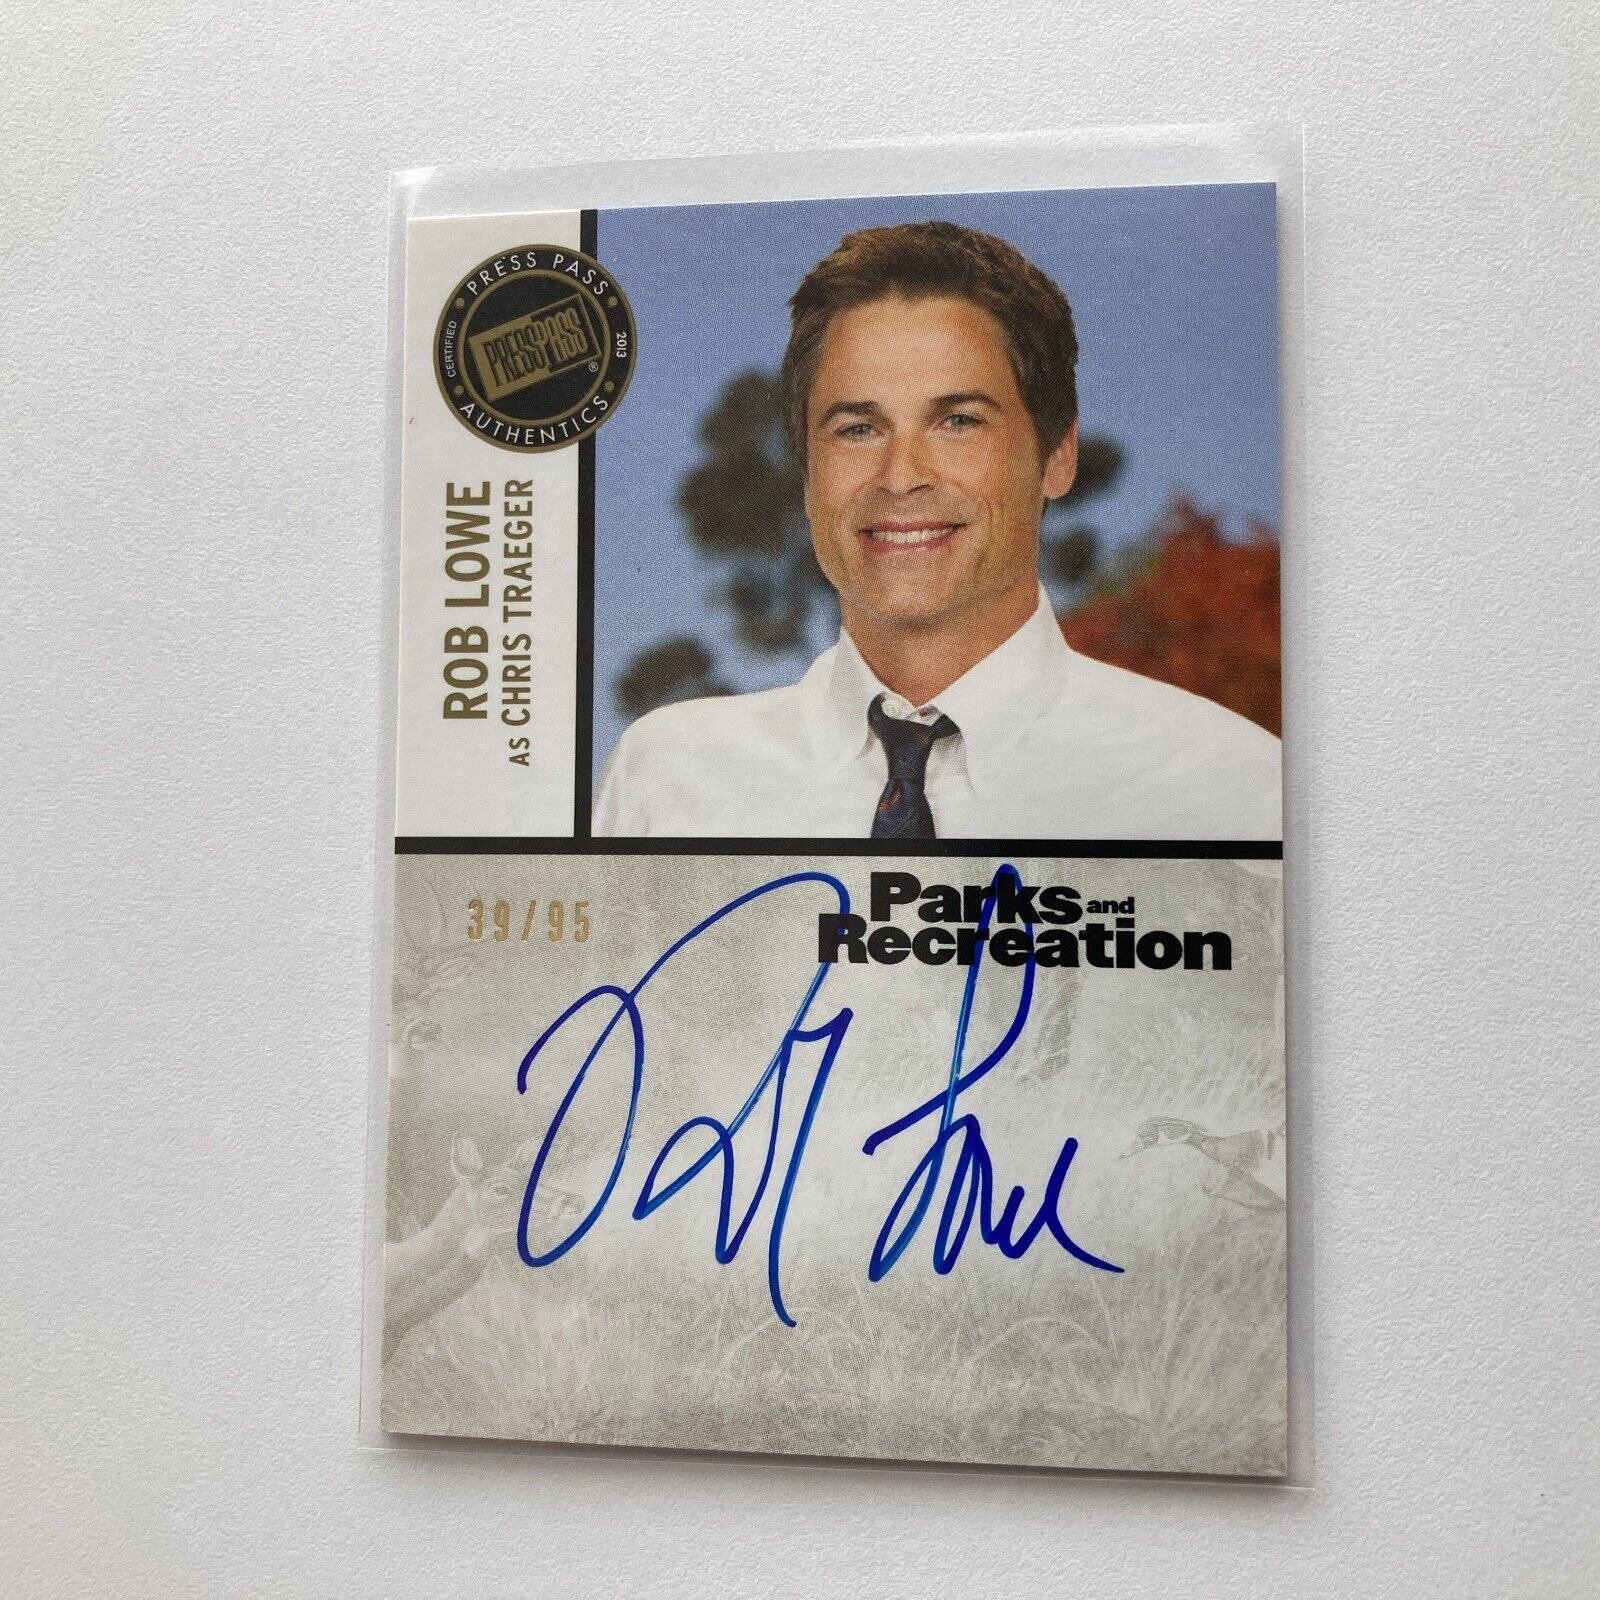 Rob Lowe 2013 Press Pass Parks and Recreation Autograph Auto Gold Card 39/95